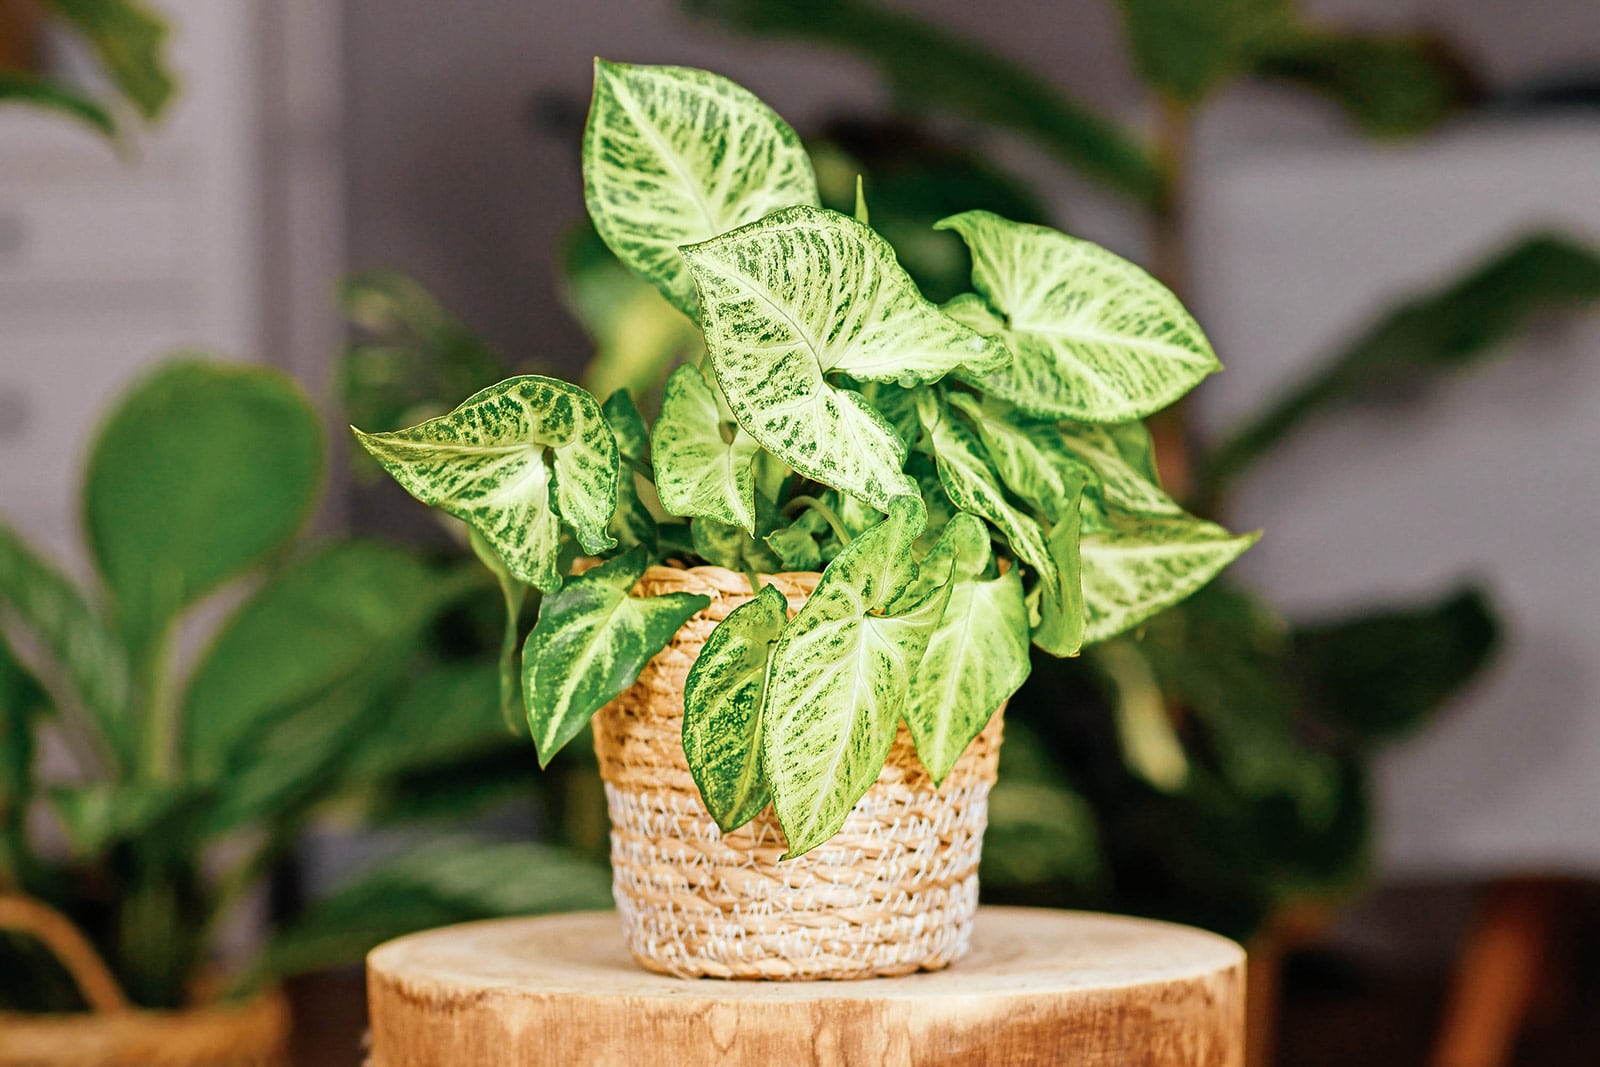 An arrowhead plant (Syngonium podophyllum) in a woven natural fiber pot, on a wooden stump, with other houseplants in the background